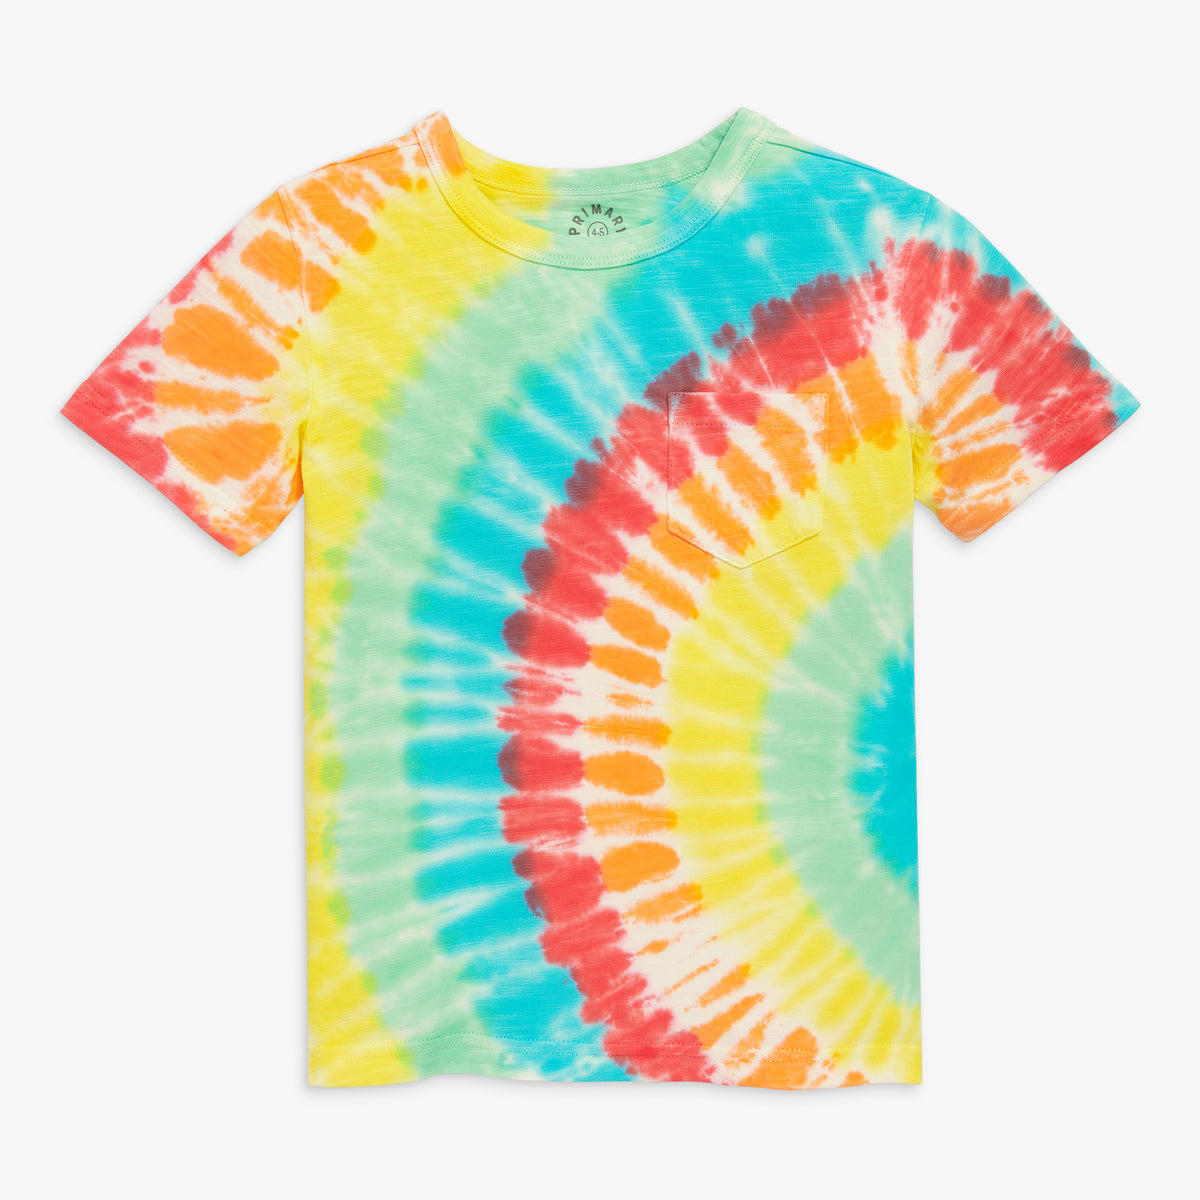 Fluorescent Pink and Yellow Tie Dye T-Shirt - Tie Dye Space